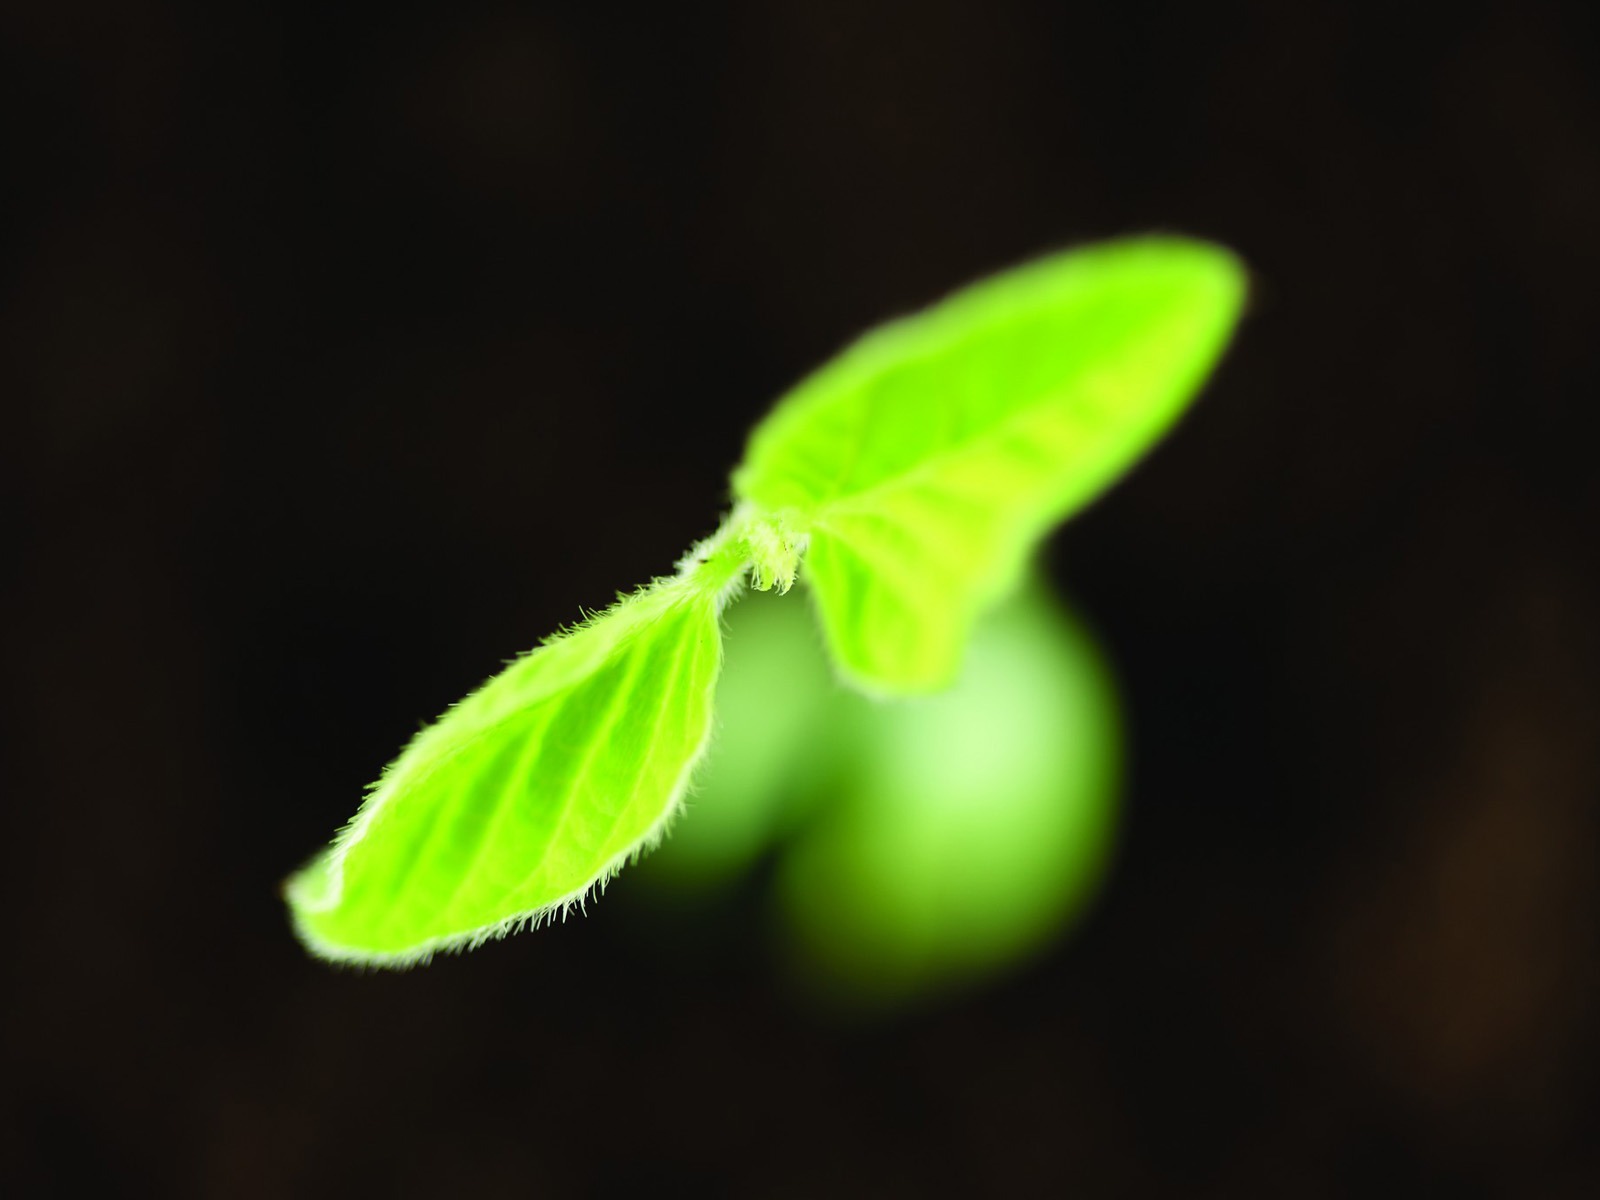 Green seedlings just sprouting HD wallpapers #5 - 1600x1200